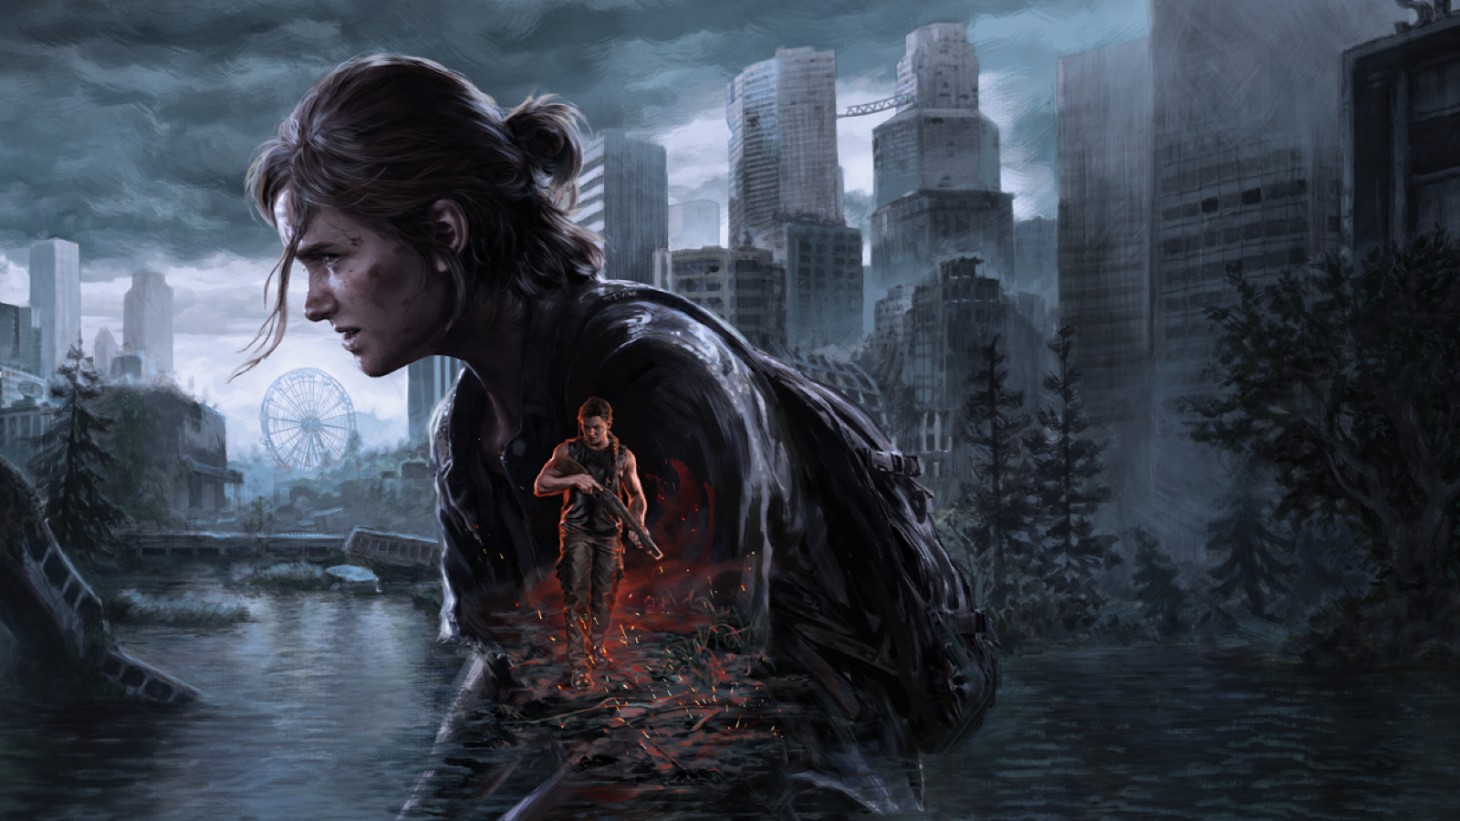 The Last Of Us 2 PS5 Video Shows How a 4K 60 FPS Upgrade Could Look